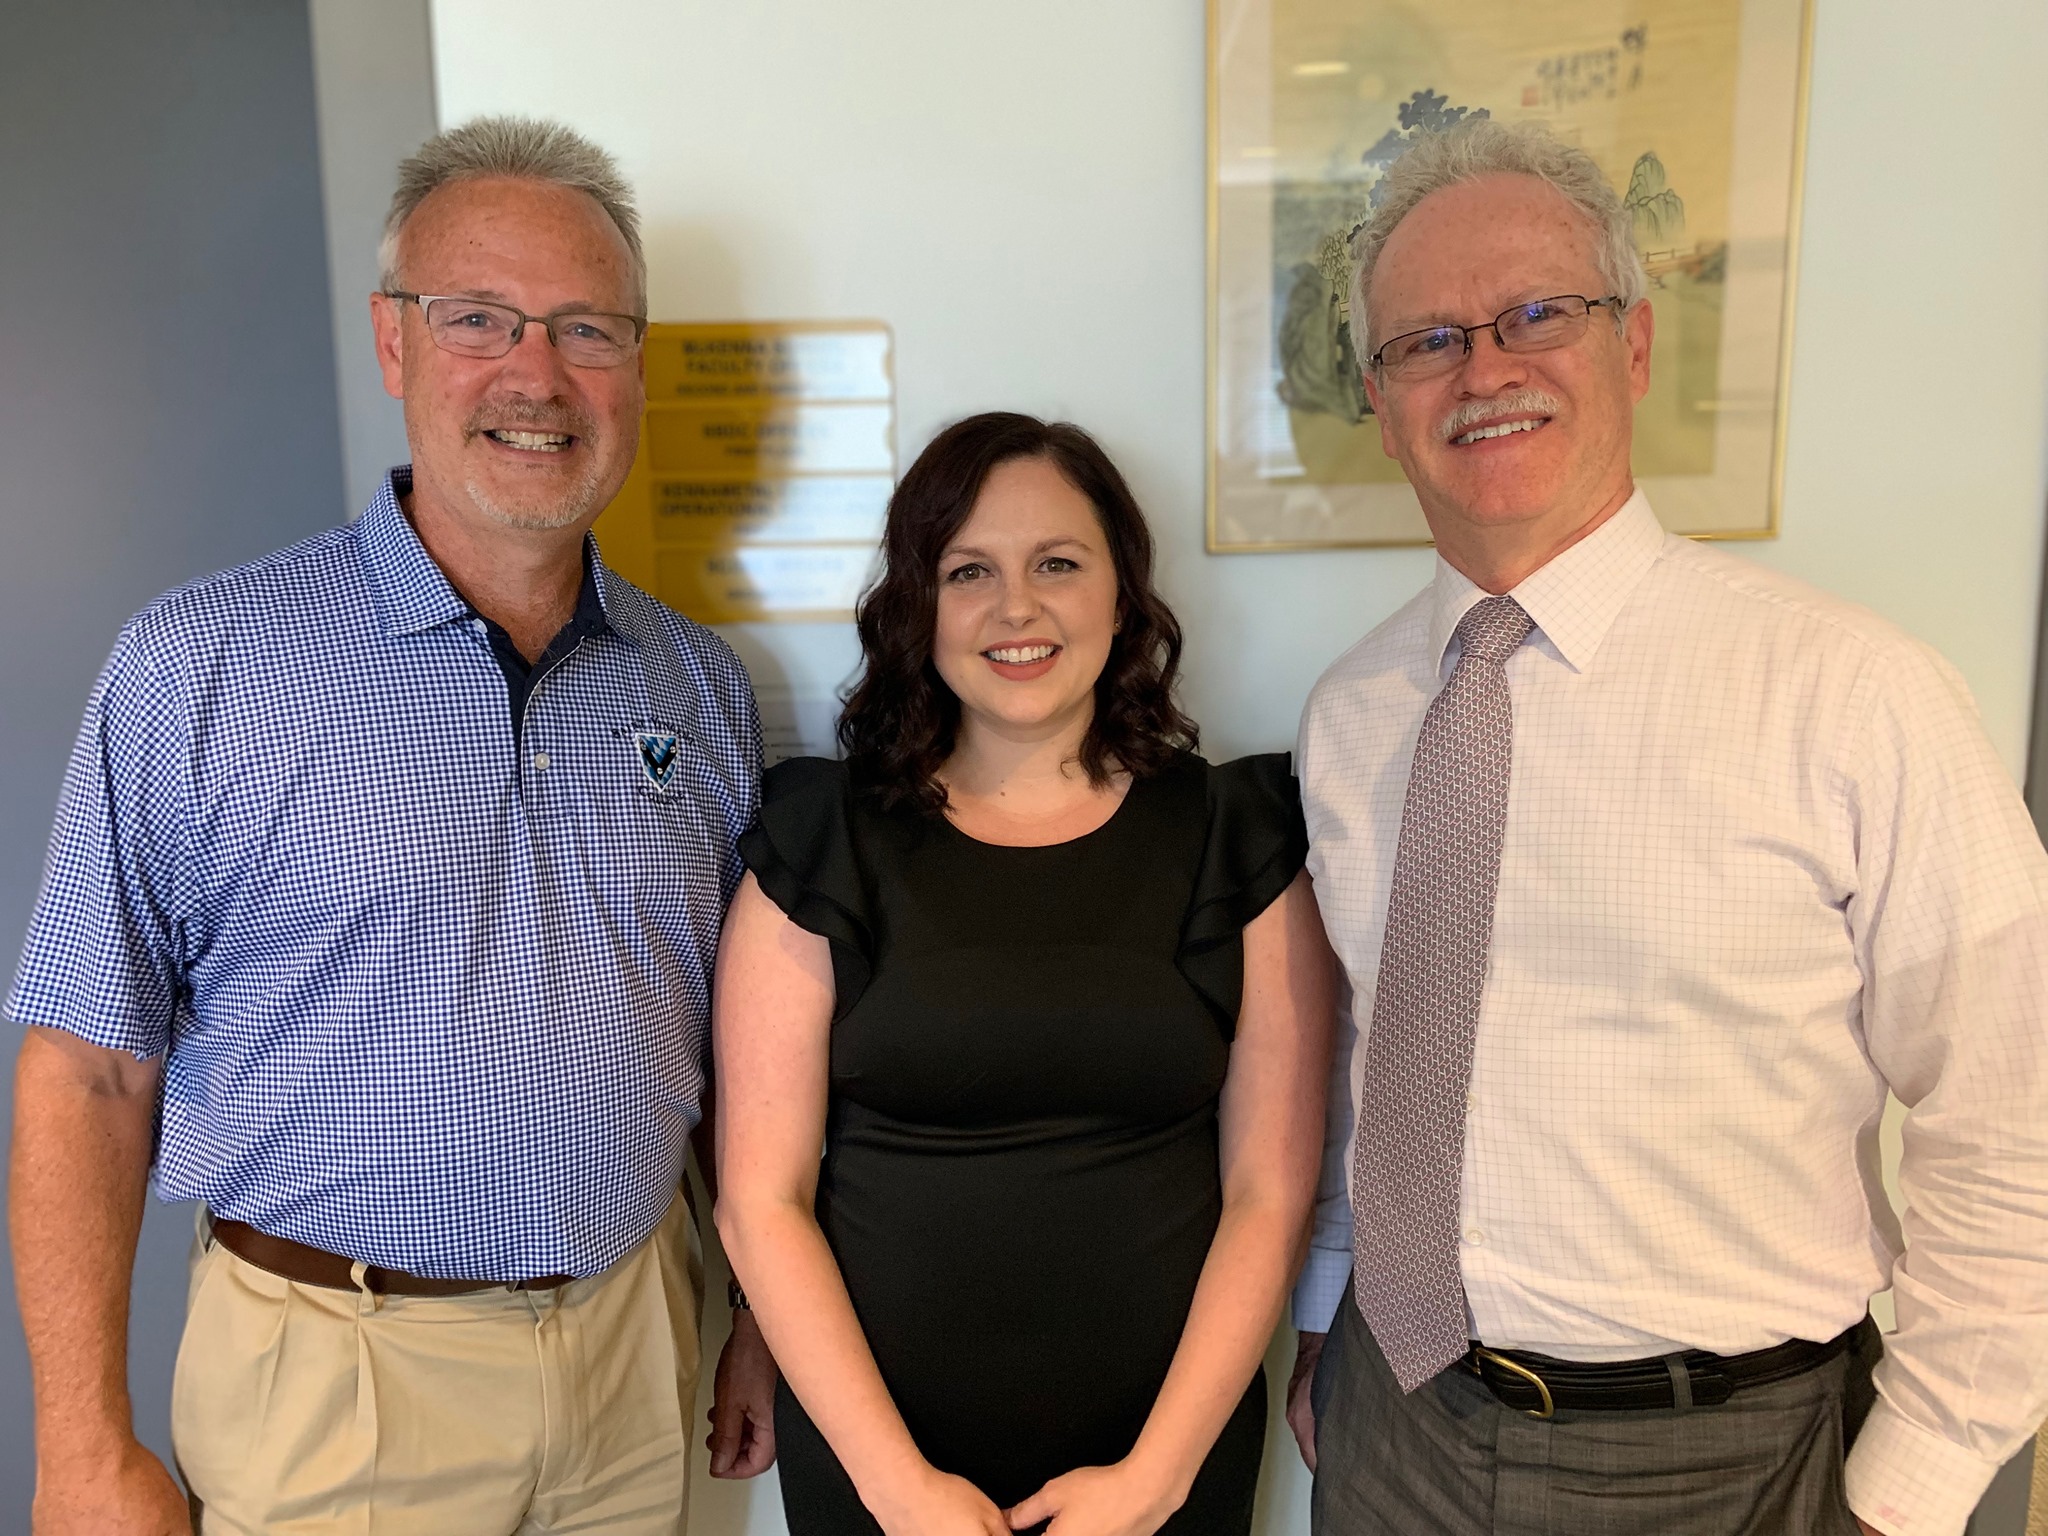    PHOTO: Briana Baum with instructor of business administration Robert Markley and former dean of the McKenna School Dr. Gary Quinlivan